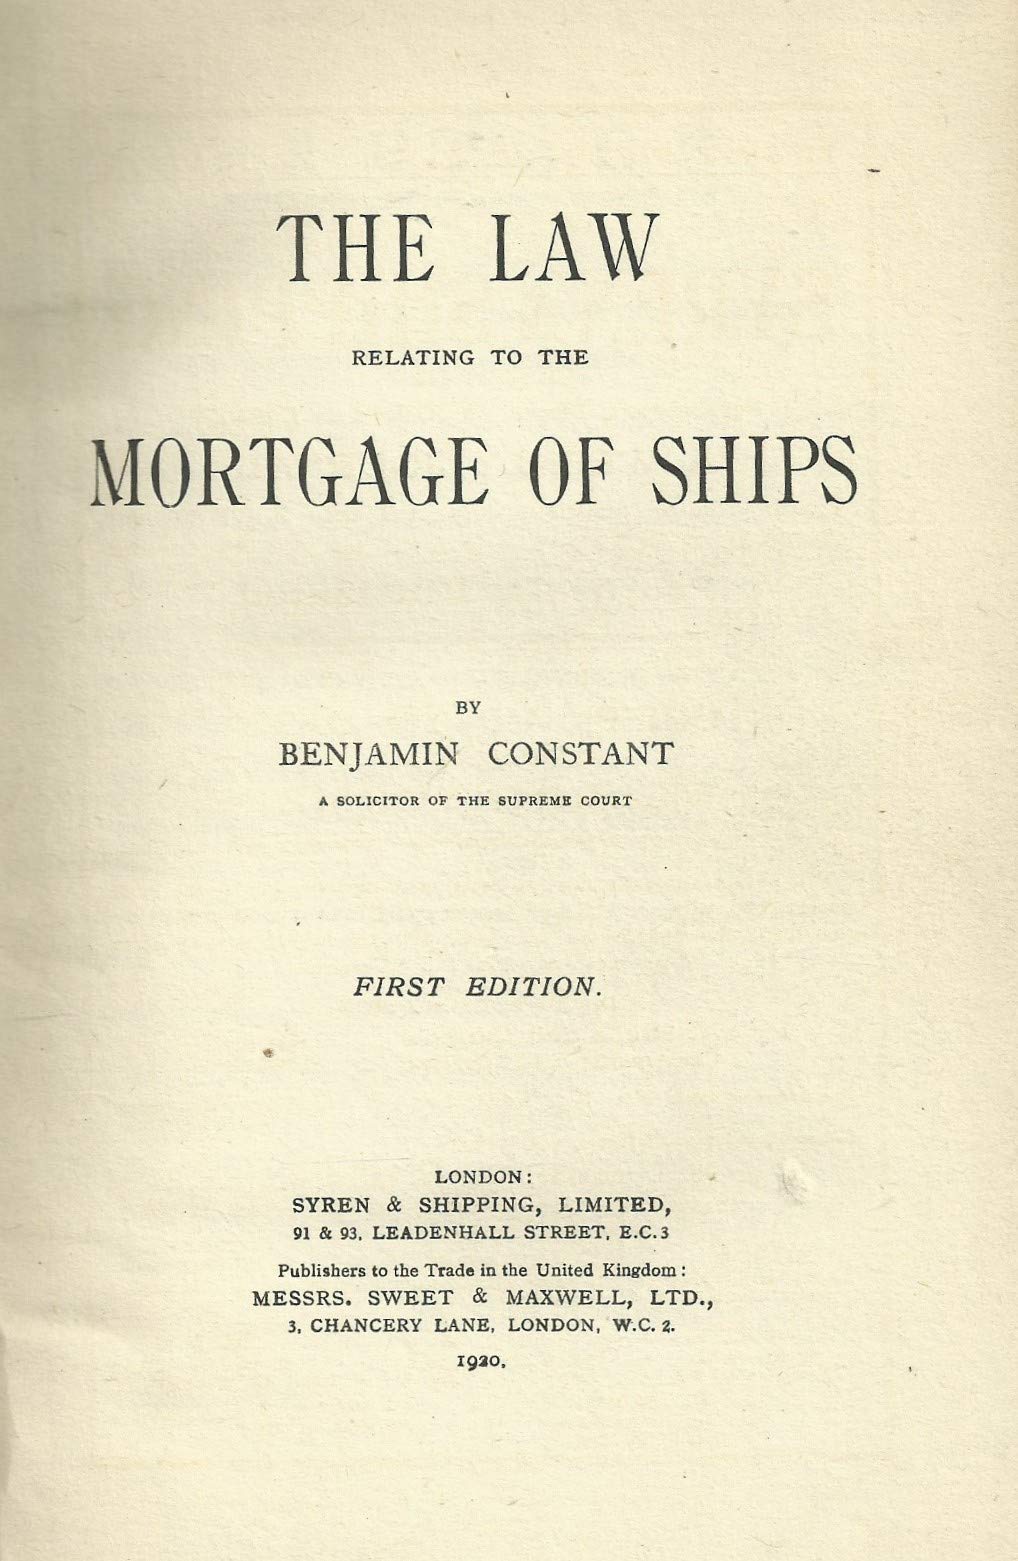 The Law relating to the Mortgage of Ships